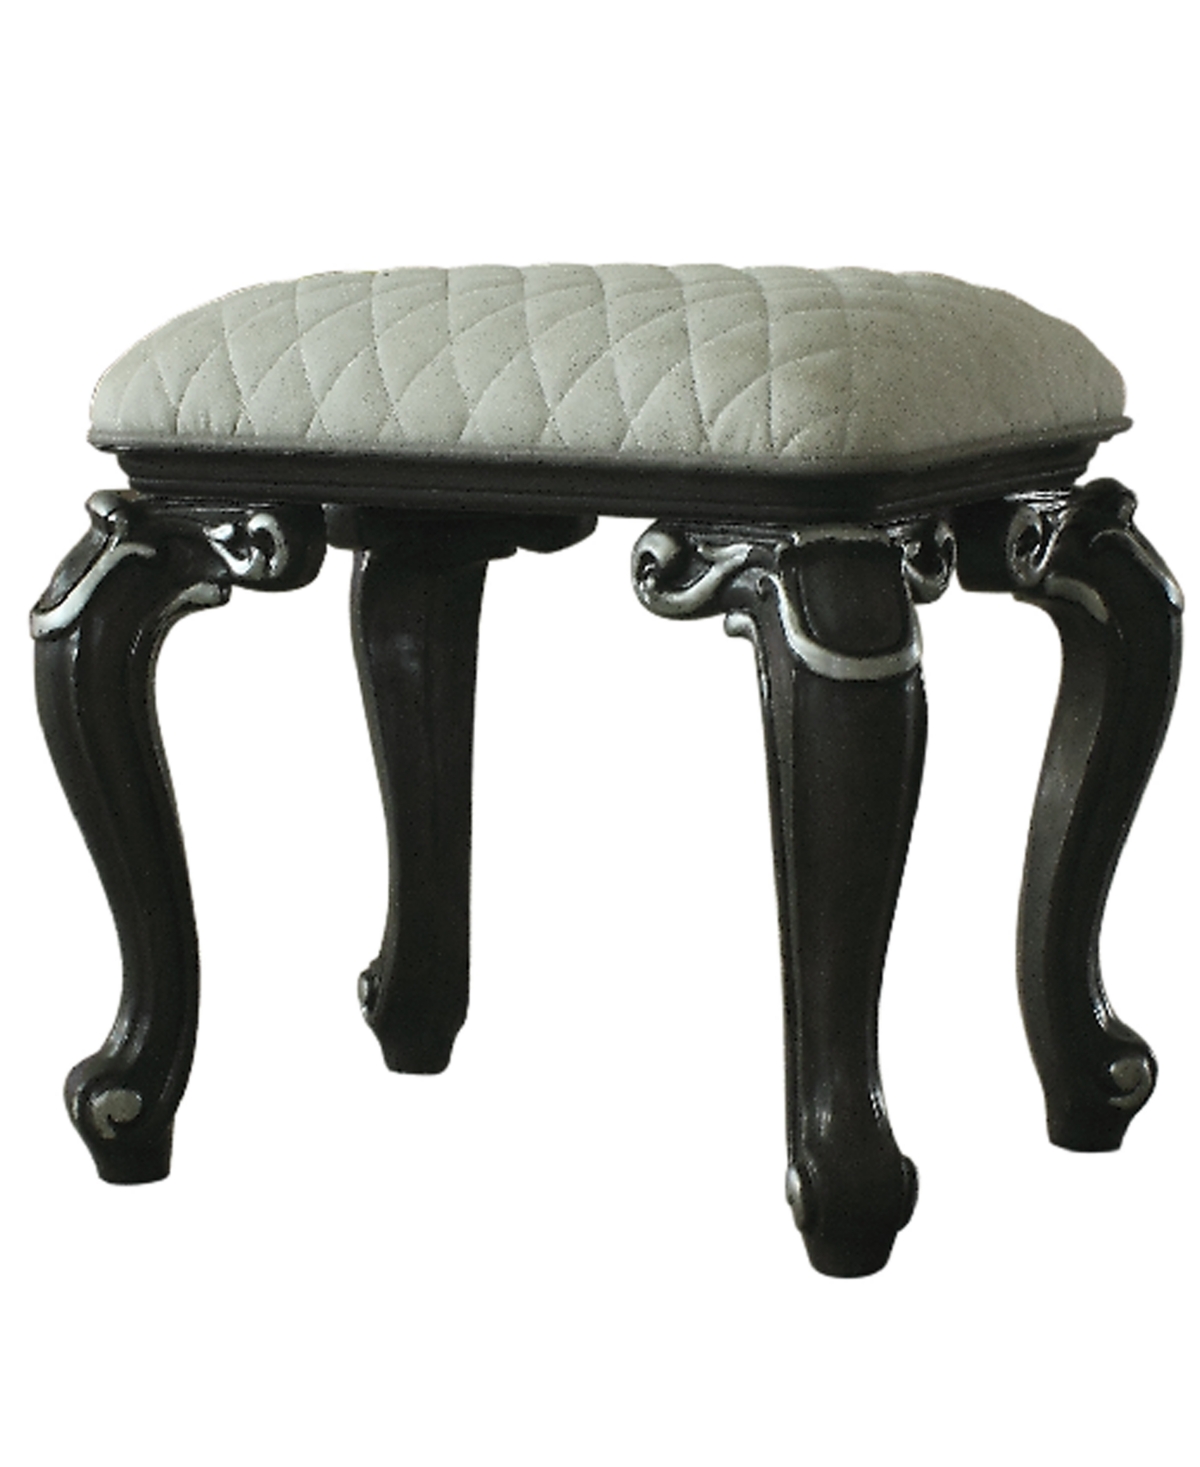 Acme Furniture House Delphine Stool In Two Tone Ivory Fabric And Charcoal Finis